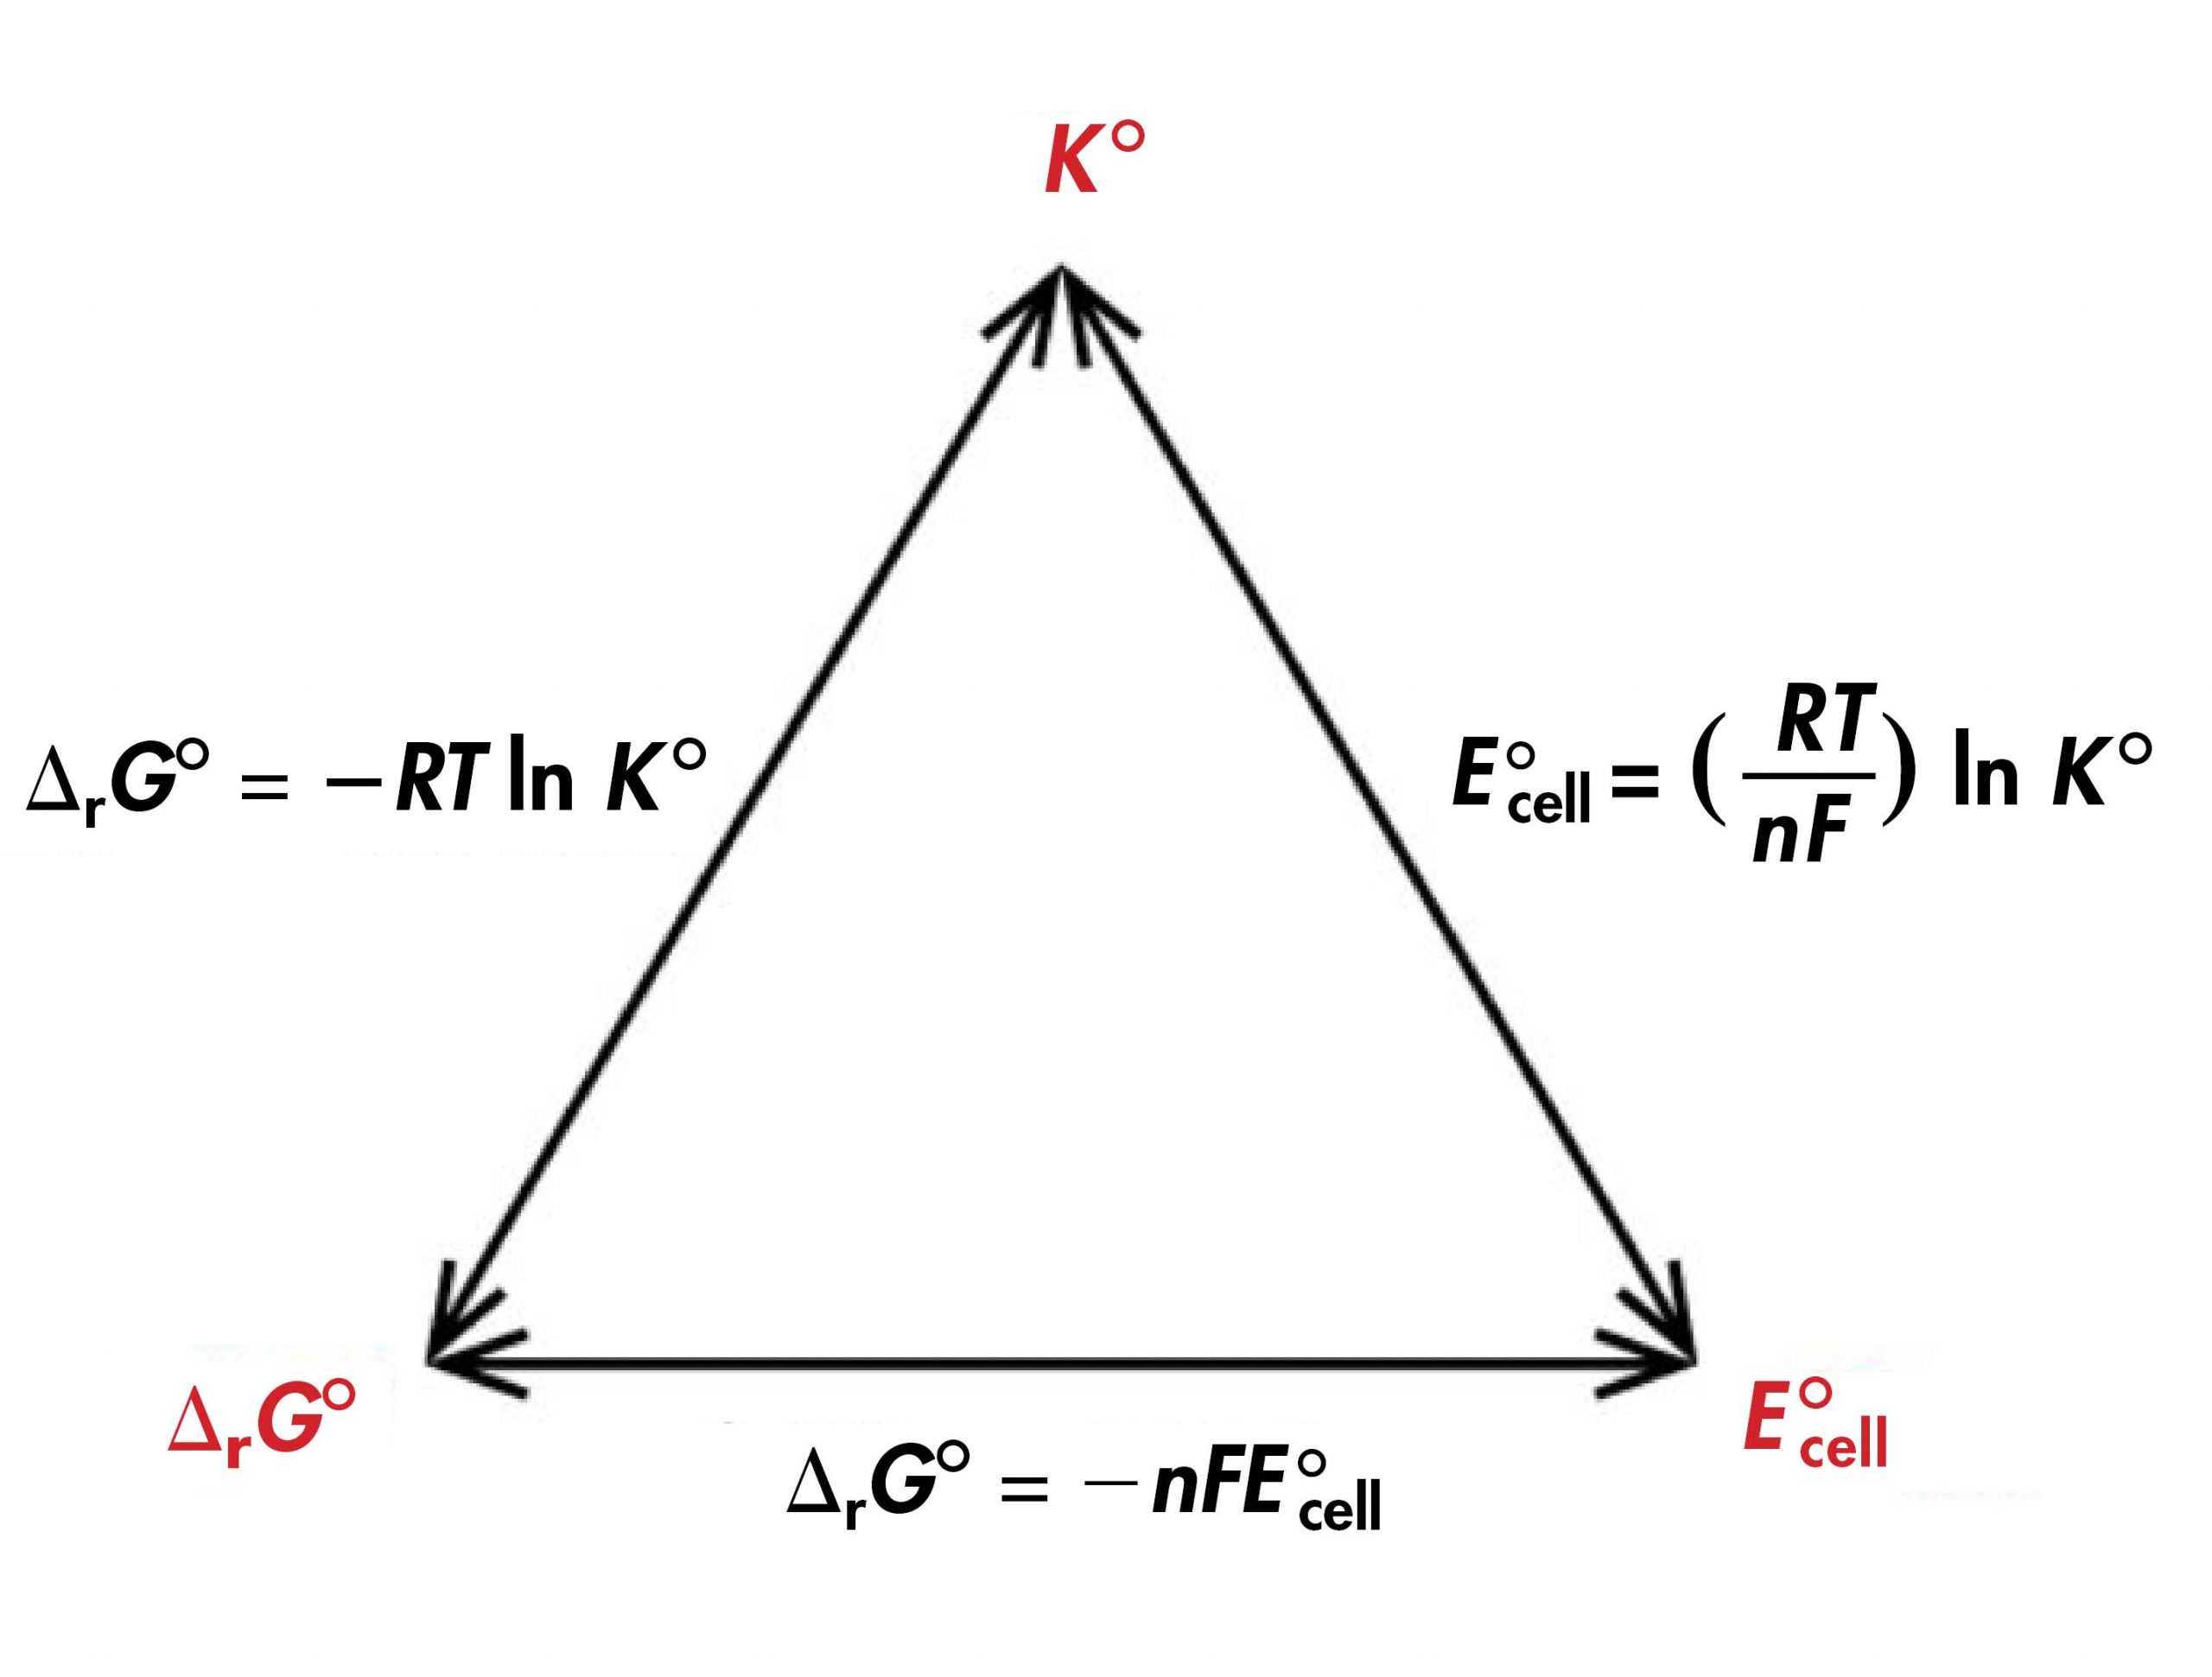 A diagram is shown that involves three double headed arrows positioned in the shape of an equilateral triangle. The vertices are labeled in red. The top vertex is labeled “K standard.“ The vertex at the lower left is labeled “delta G standard” The vertex at the lower right is labeled “E standard subscript cell.” The right side of the triangle is labeled “E superscript degree symbol subscript cell equals ( R T divided by n F ) l n K superscript degree symbol.” The lower side of the triangle is labeled “delta G superscript degree symbol equals negative n F E superscript degree symbol subscript cell.” The left side of the triangle is labeled “delta G superscript degree symbol equals negative R T l n K superscript degree symbol.”